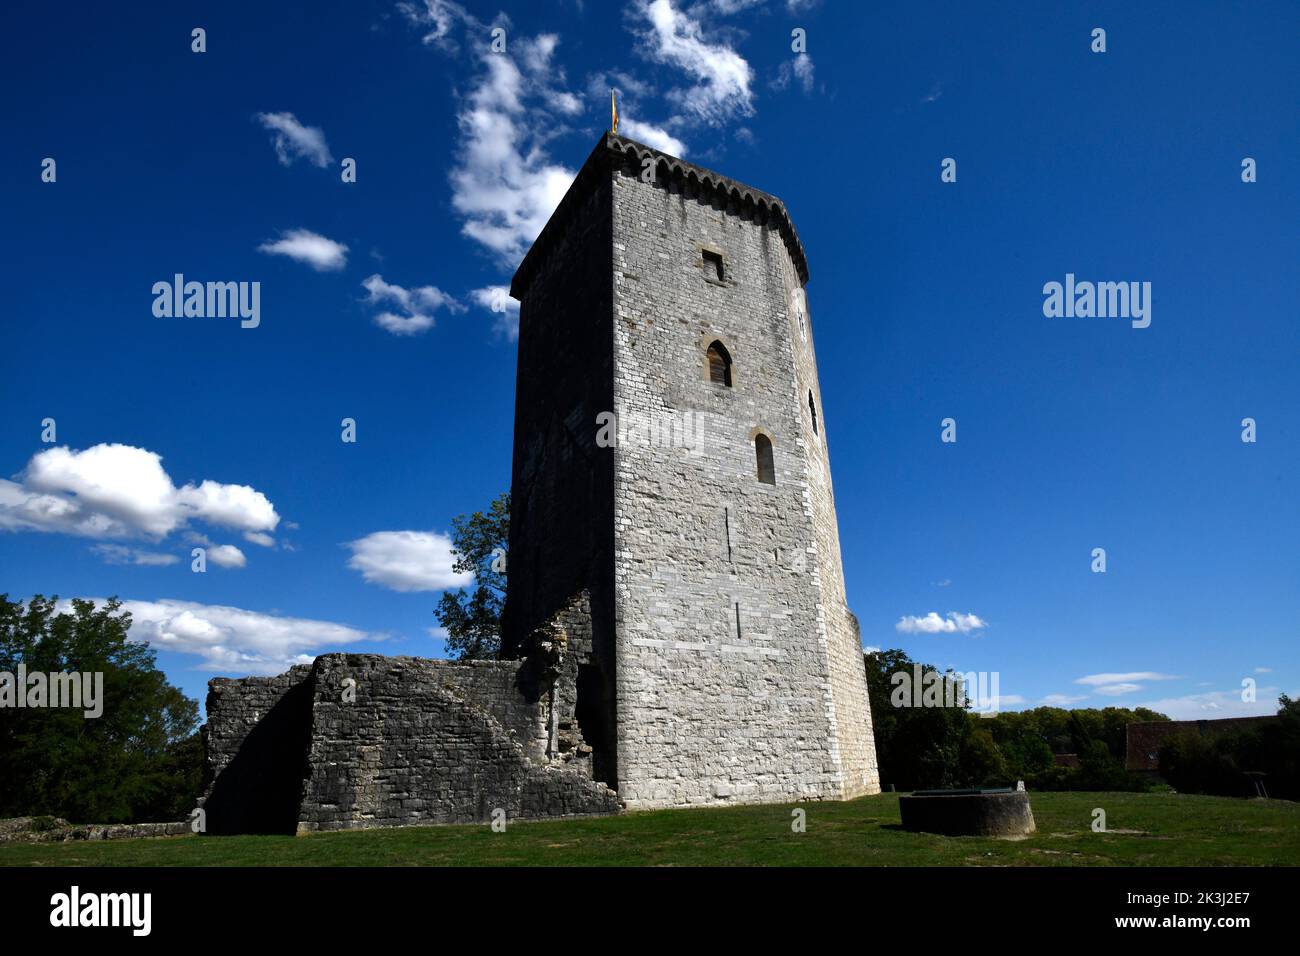 Chateau Moncade in Orthez, France Stock Photo